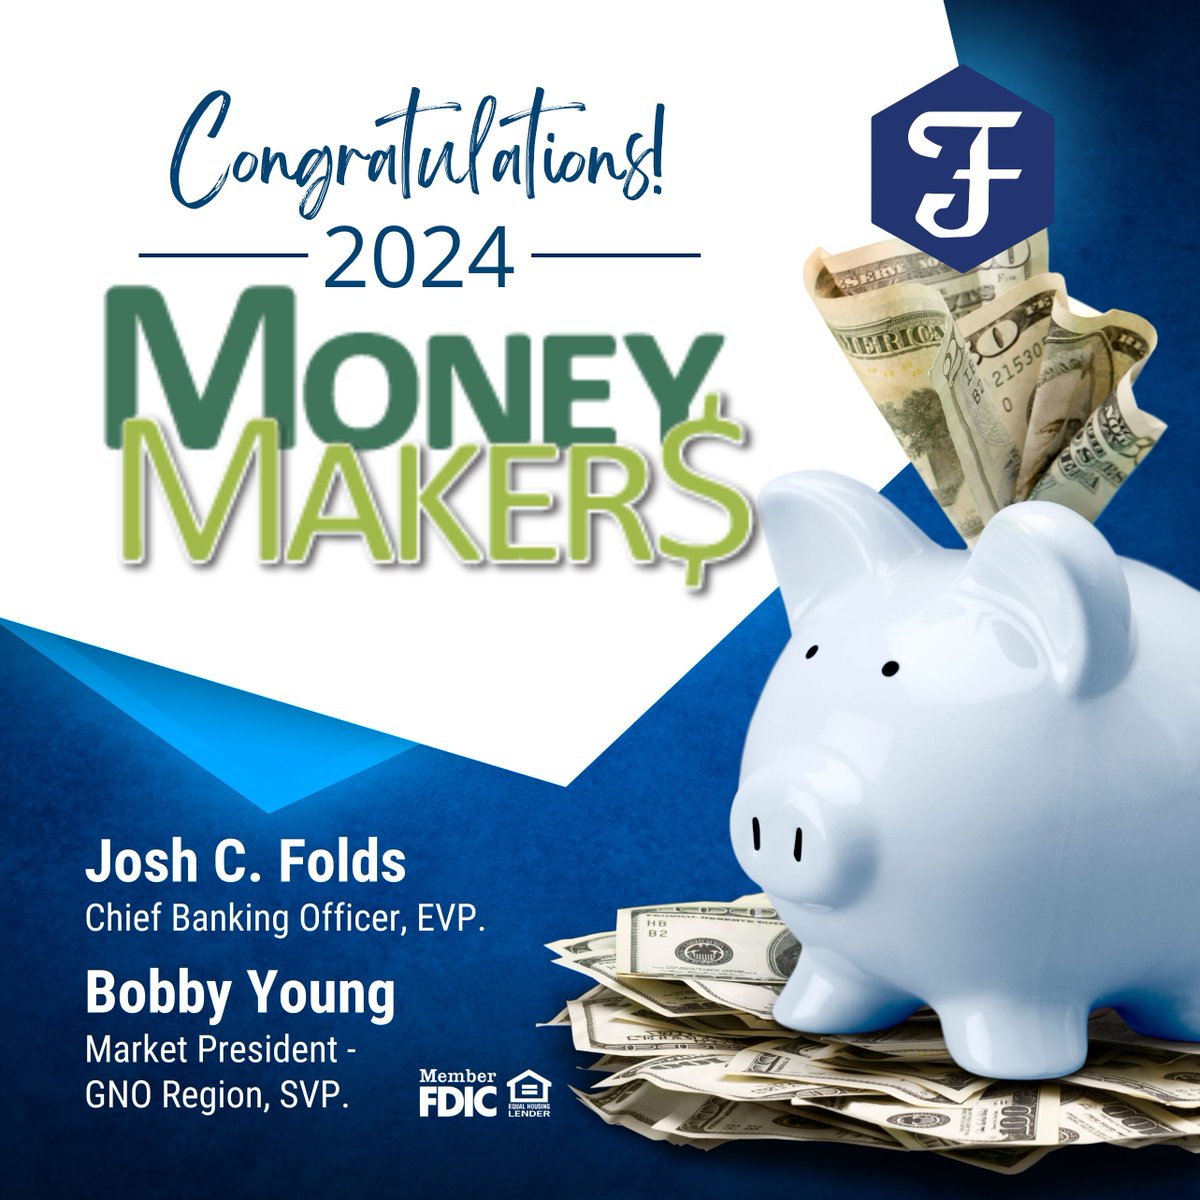 Congratulations to Josh Folds and Bobby Young for their outstanding achievement in being named to the 2024 New Orleans CityBusiness Money Makers! 🎉 #Recognition #HereForGood #MoneyMakers2024